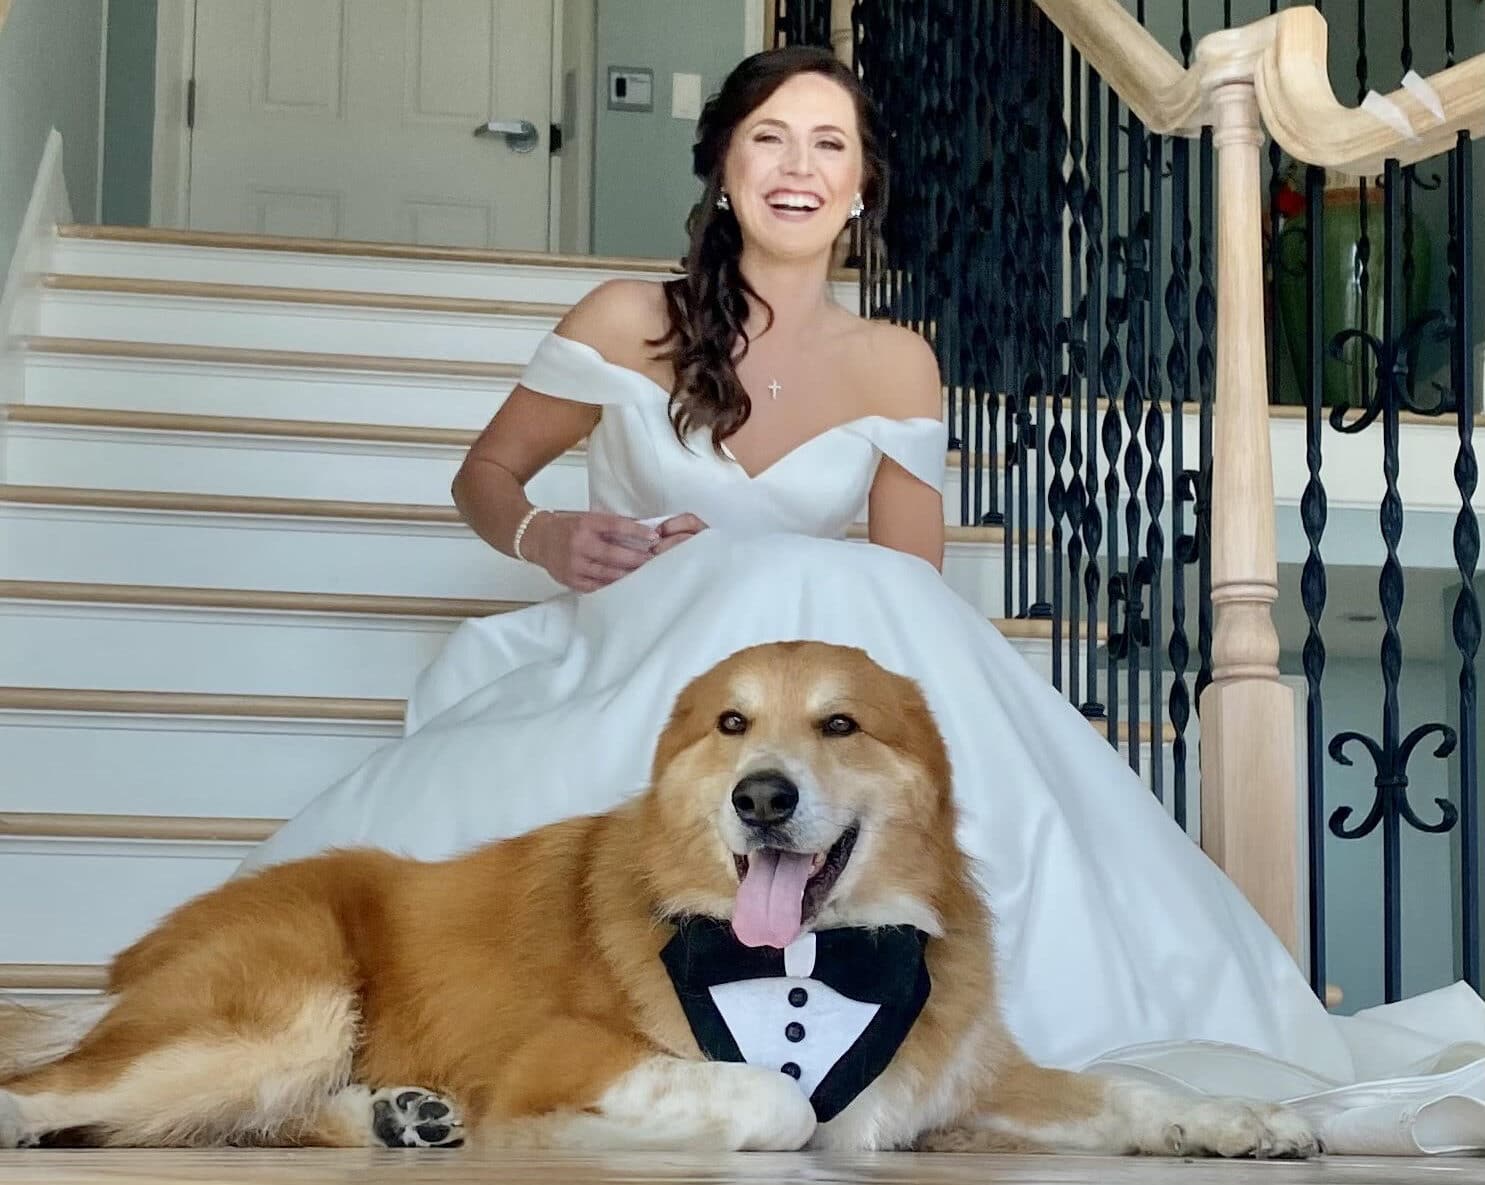 FairyTails, dog with bride on steps